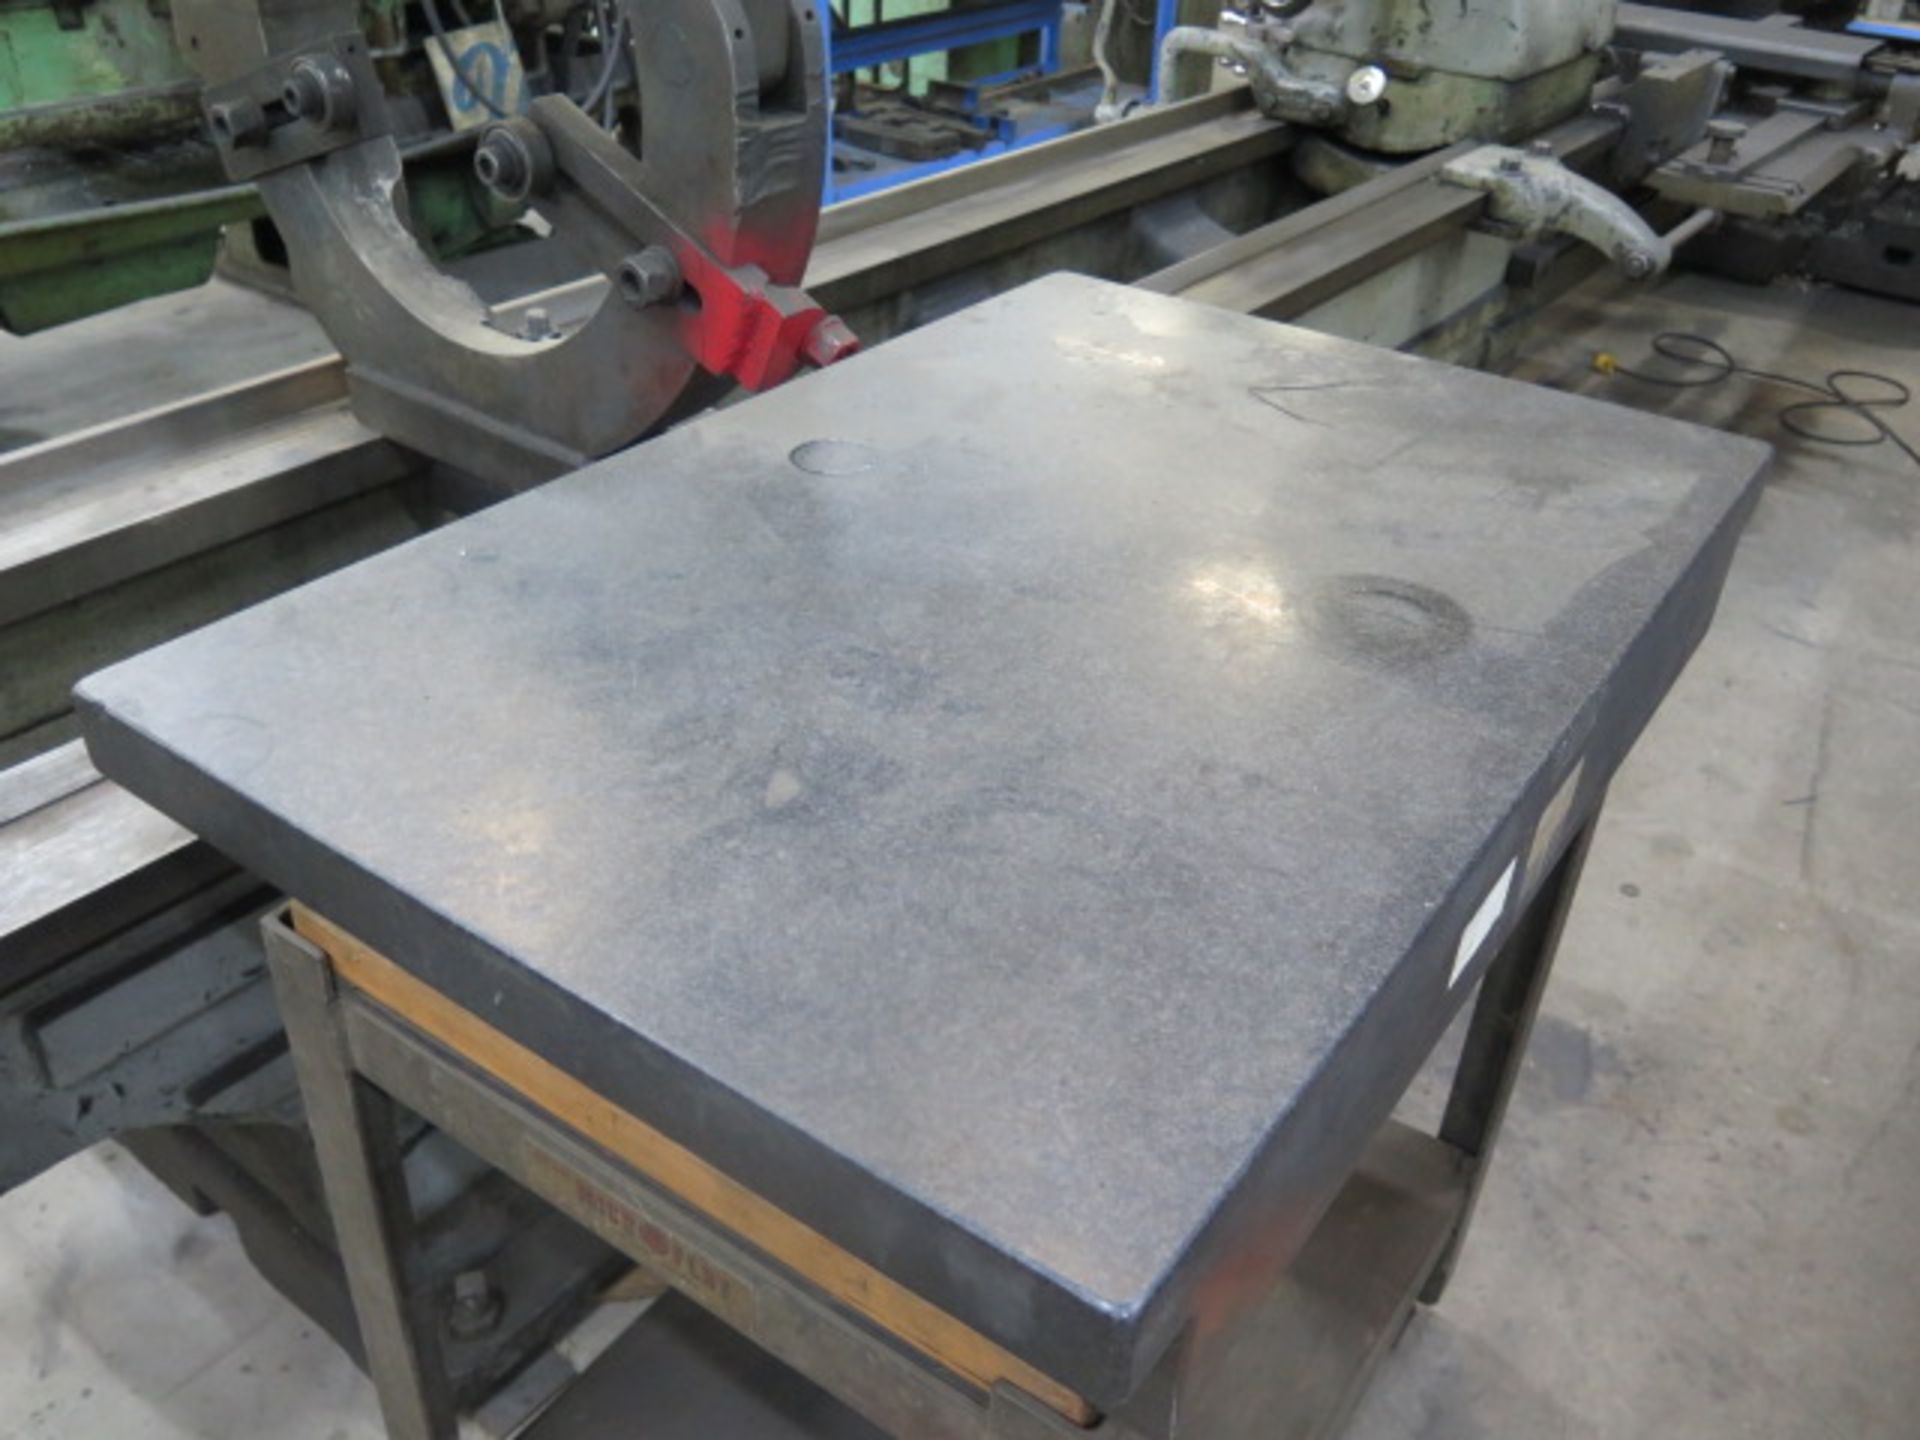 24” x 36” x 5 ½” 2-Ledge Granite Surface Plate w/ Stand (SOLD AS-IS - NO WARRANTY) - Image 3 of 4